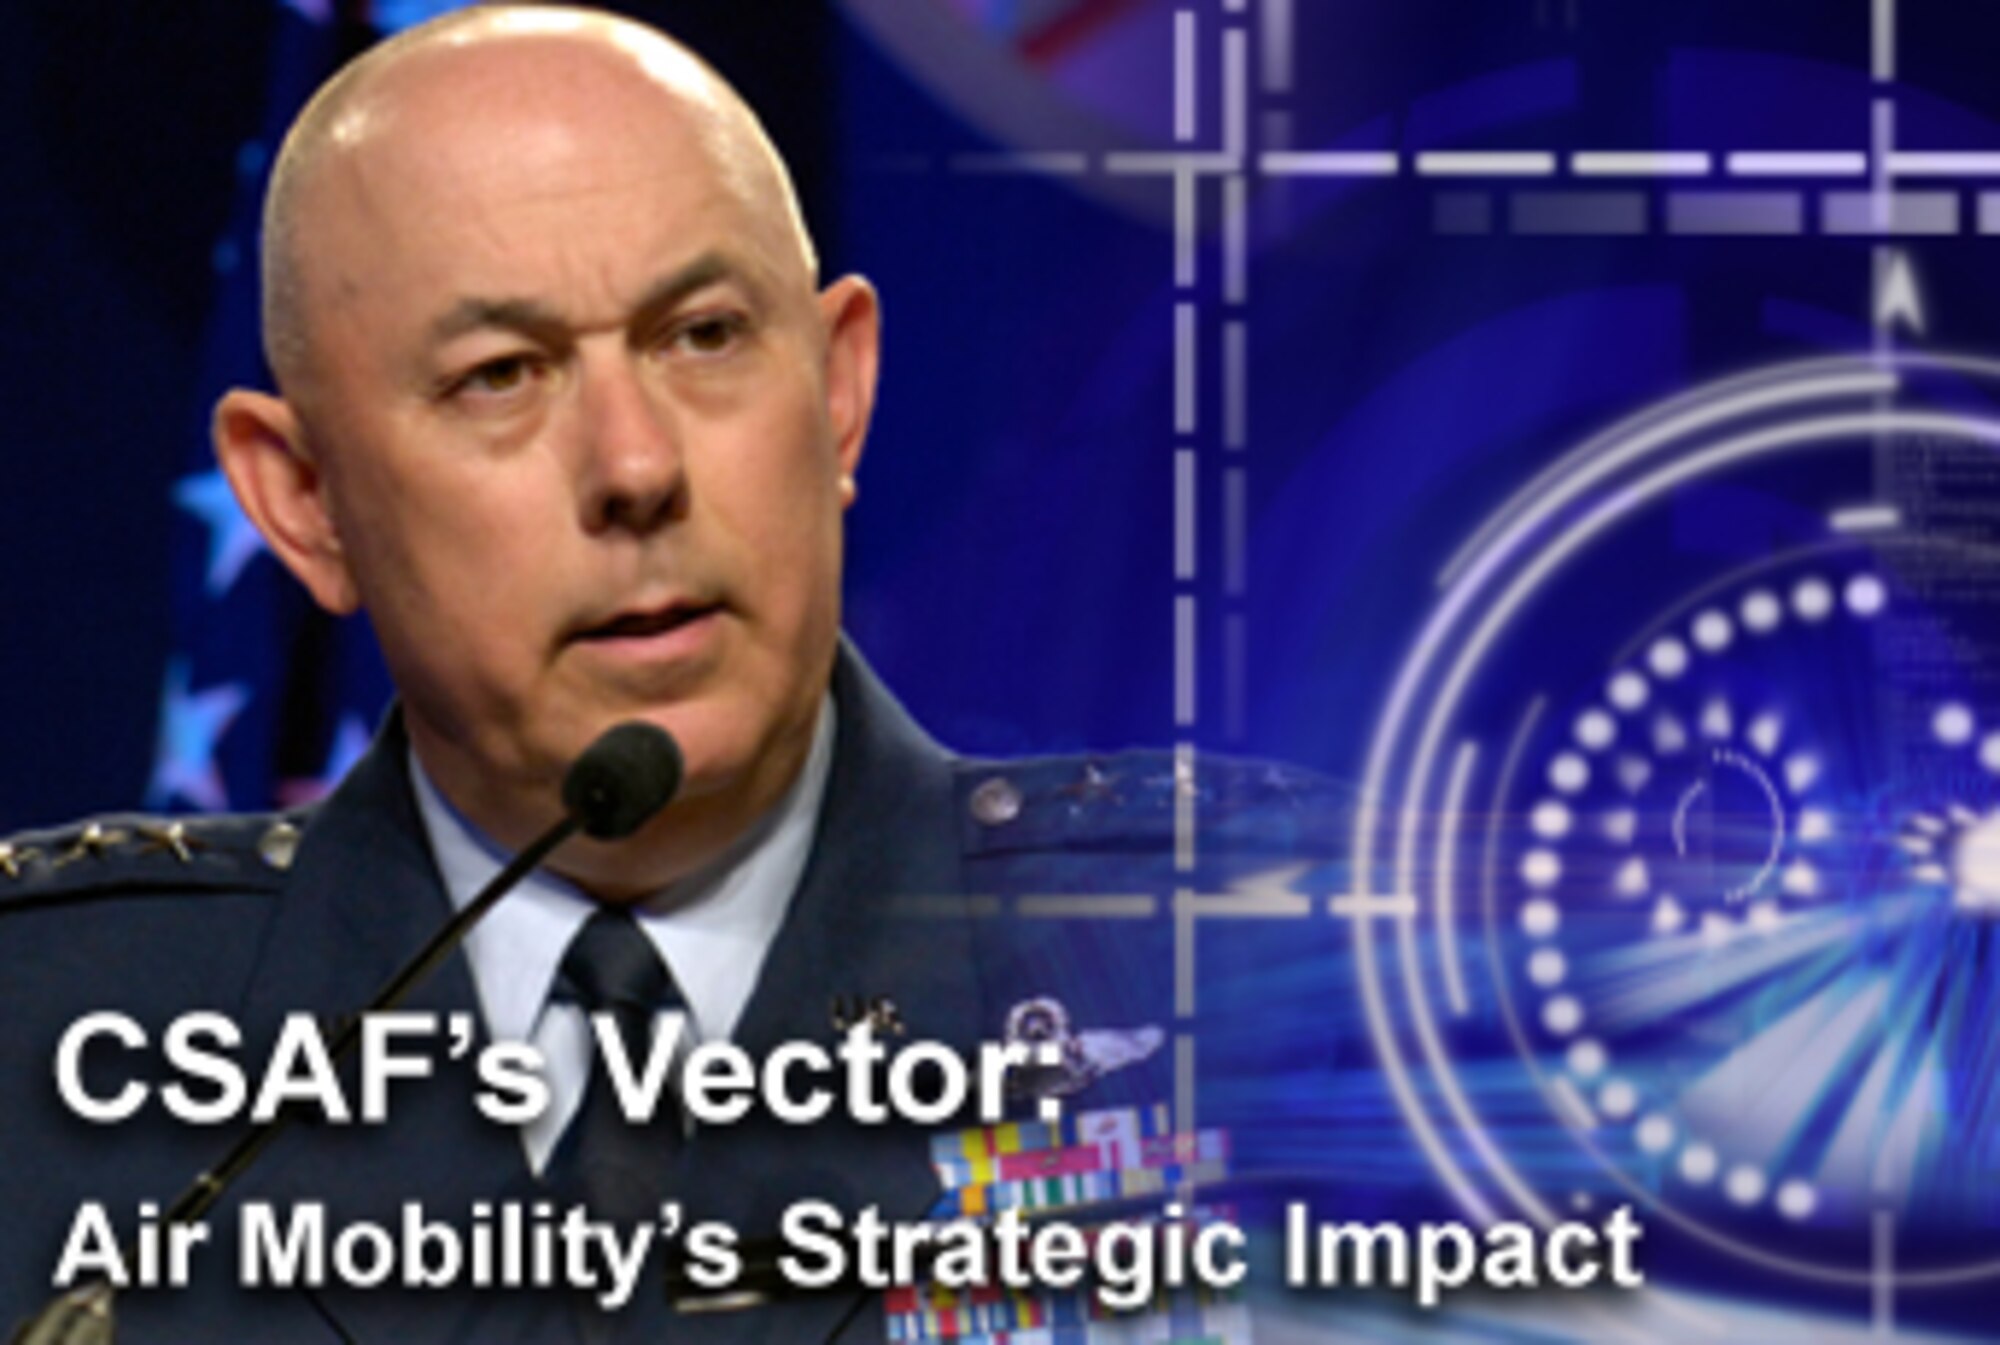 Gen. T. Michael Moseley discusses the importance of air mobility from the Berlin Airlift to today in the latest Chief of Staff's Vector. (U.S. Air Force photo illustration/Mike Carabajal)

